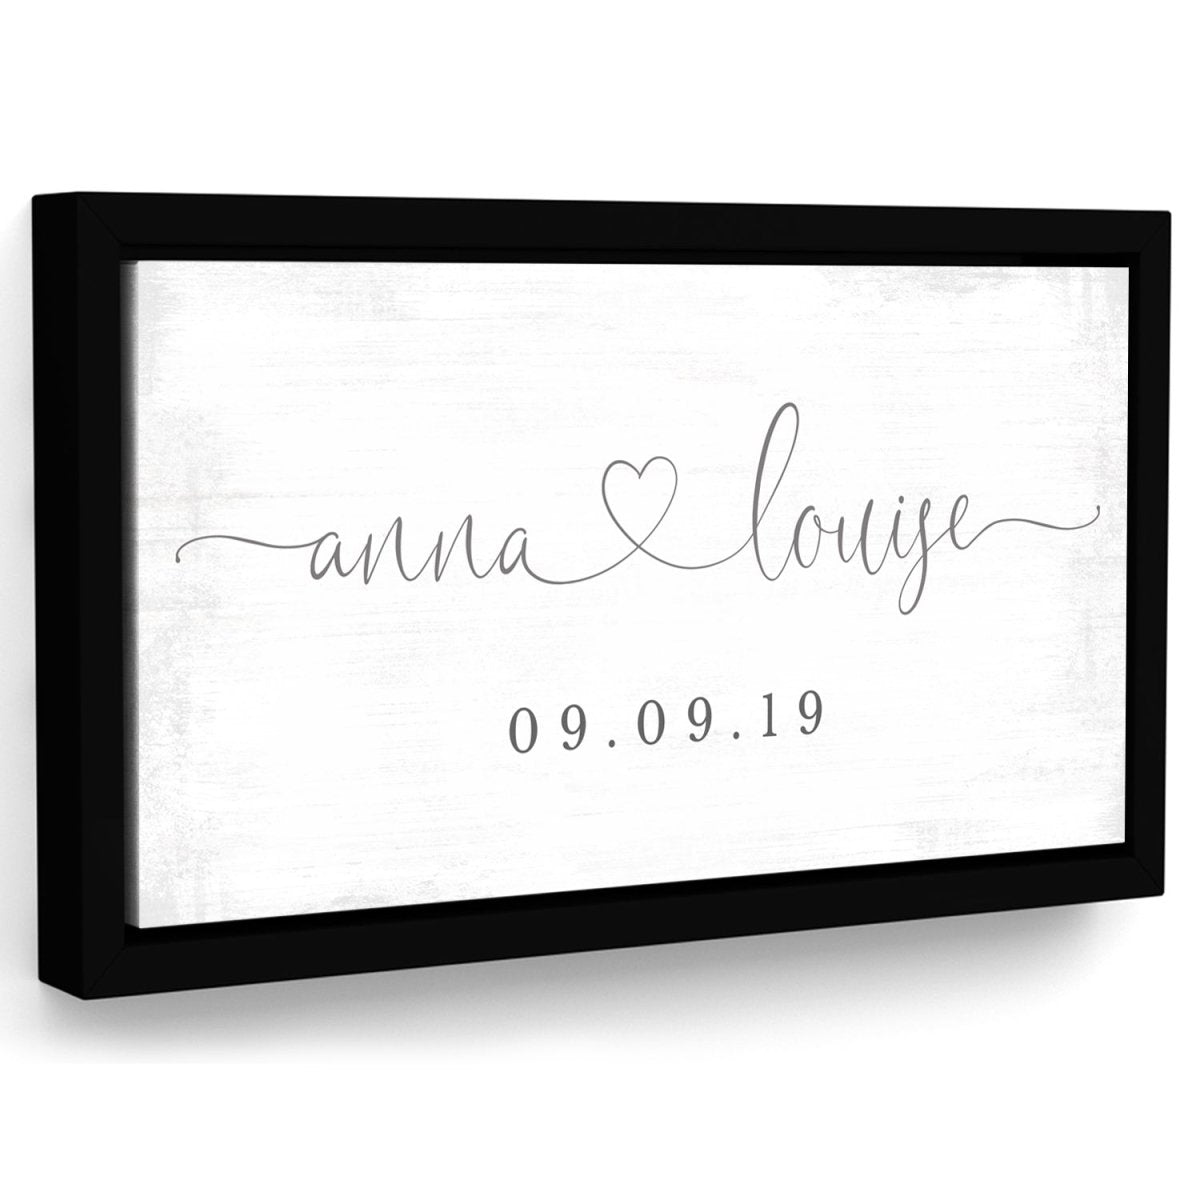 Boy or Girl Personalized Name Sign for the Nursery Room - Pretty Perfect Studio